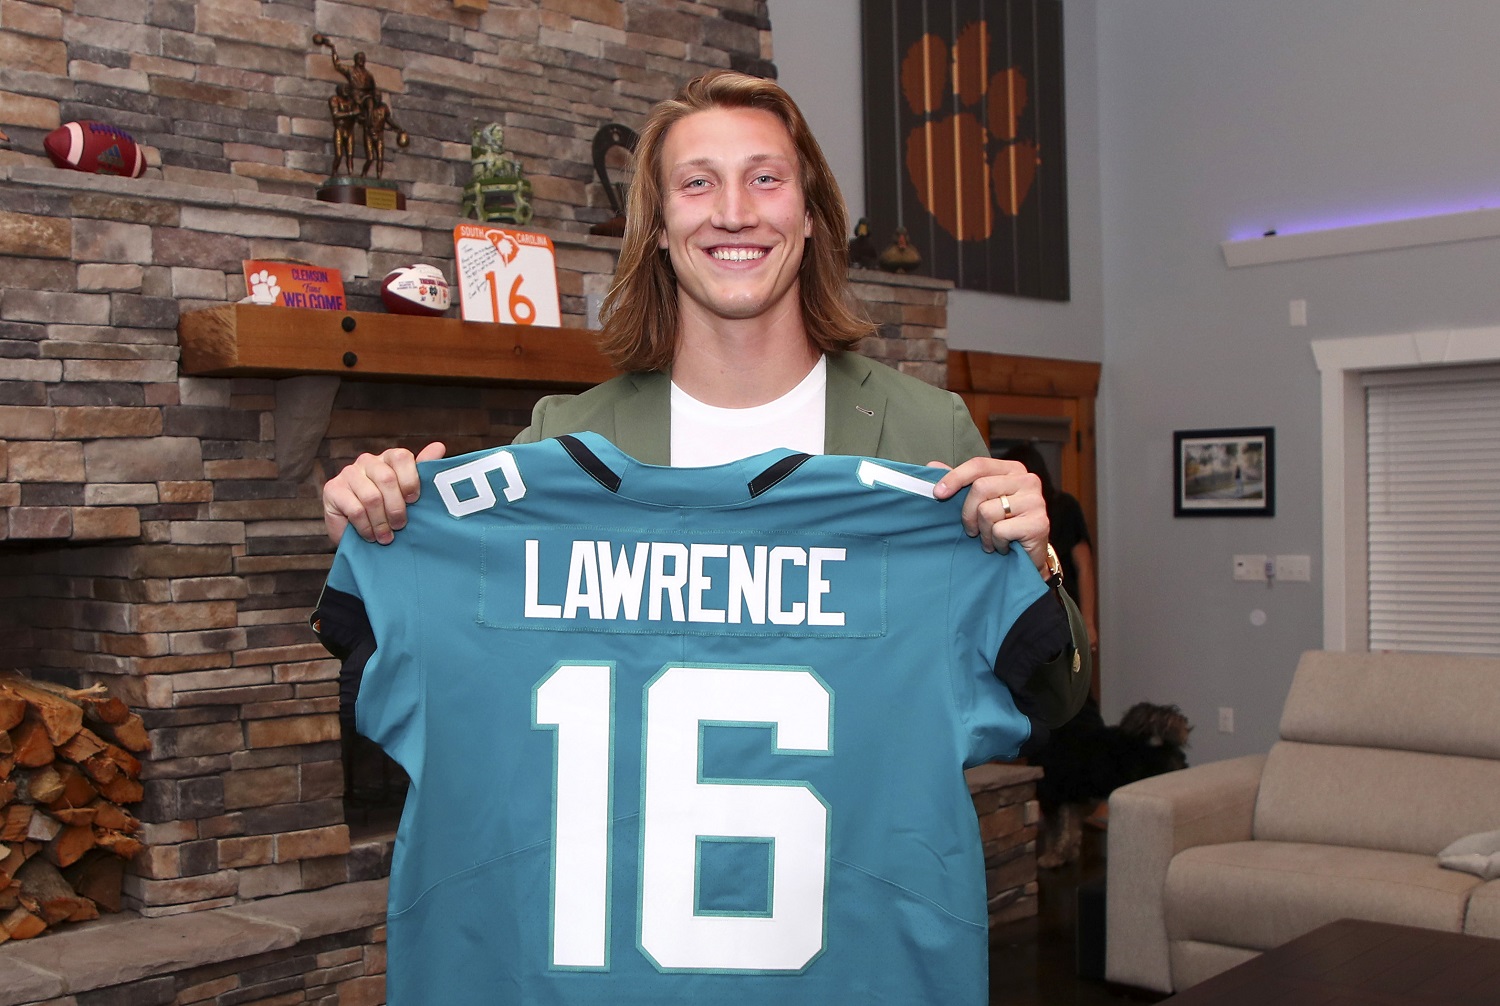 Trevor Lawrence poses after being selected with the first overall pick by the Jacksonville Jaguars in the 2021 NFL Draft. | Logan Bowles/NFL via Getty Images